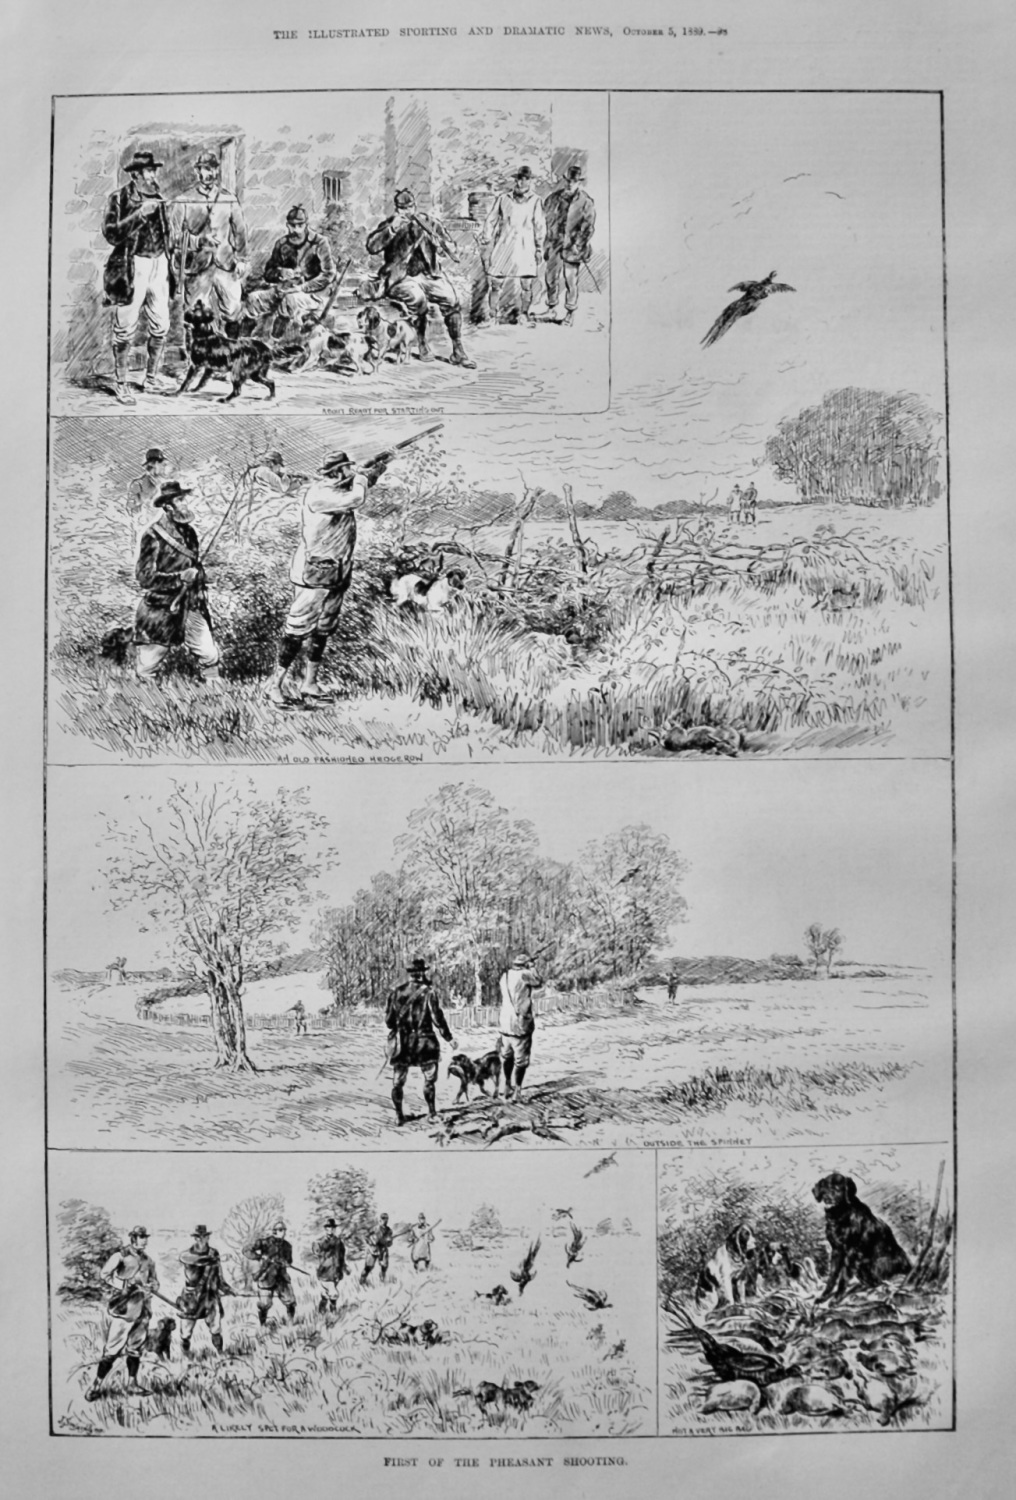 First of the Pheasant Shooting.  1889.